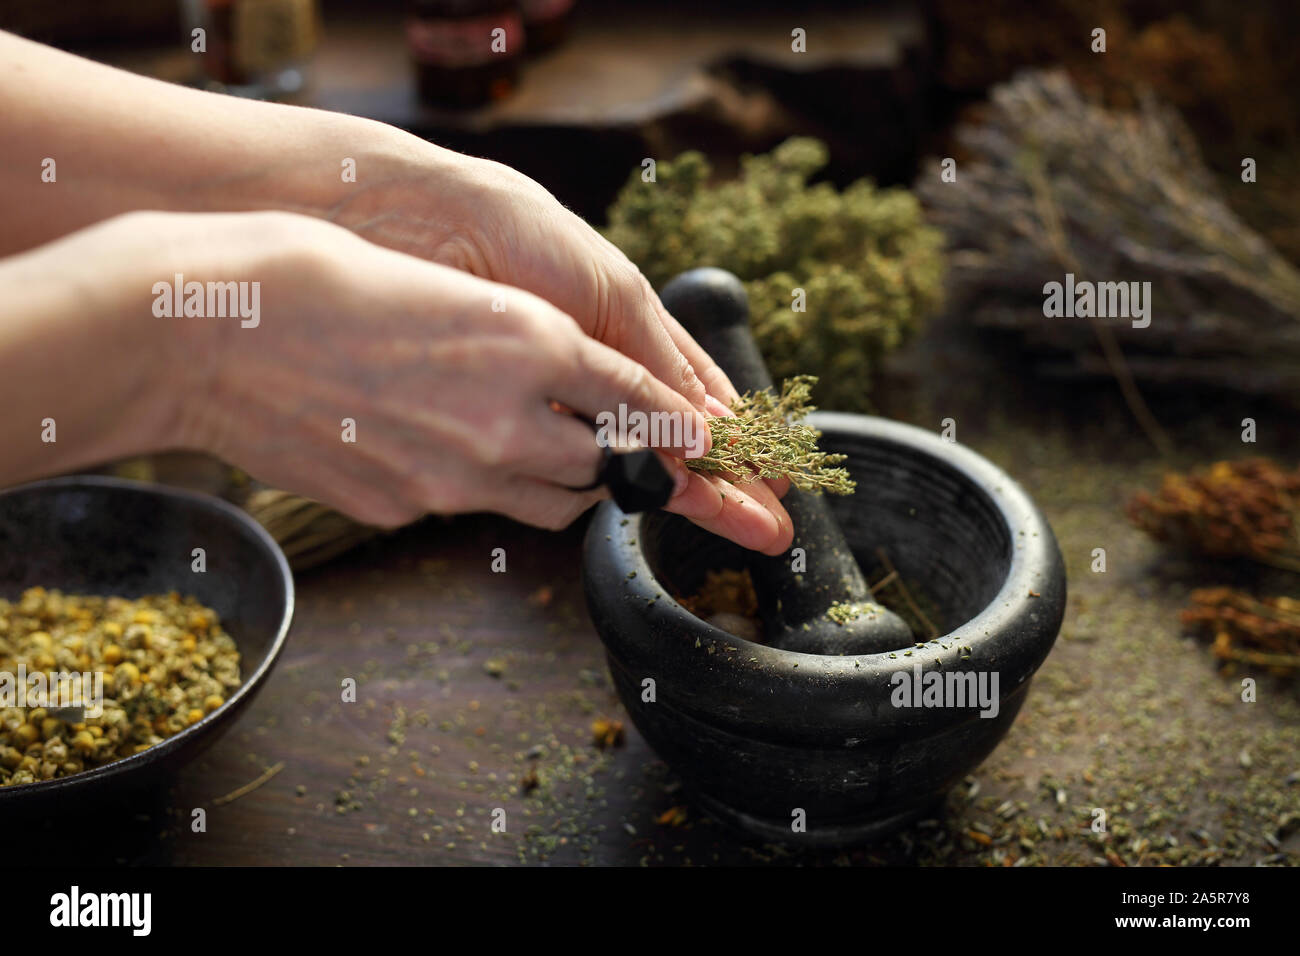 Dried herbs in natural medicine and cooking Stock Photo